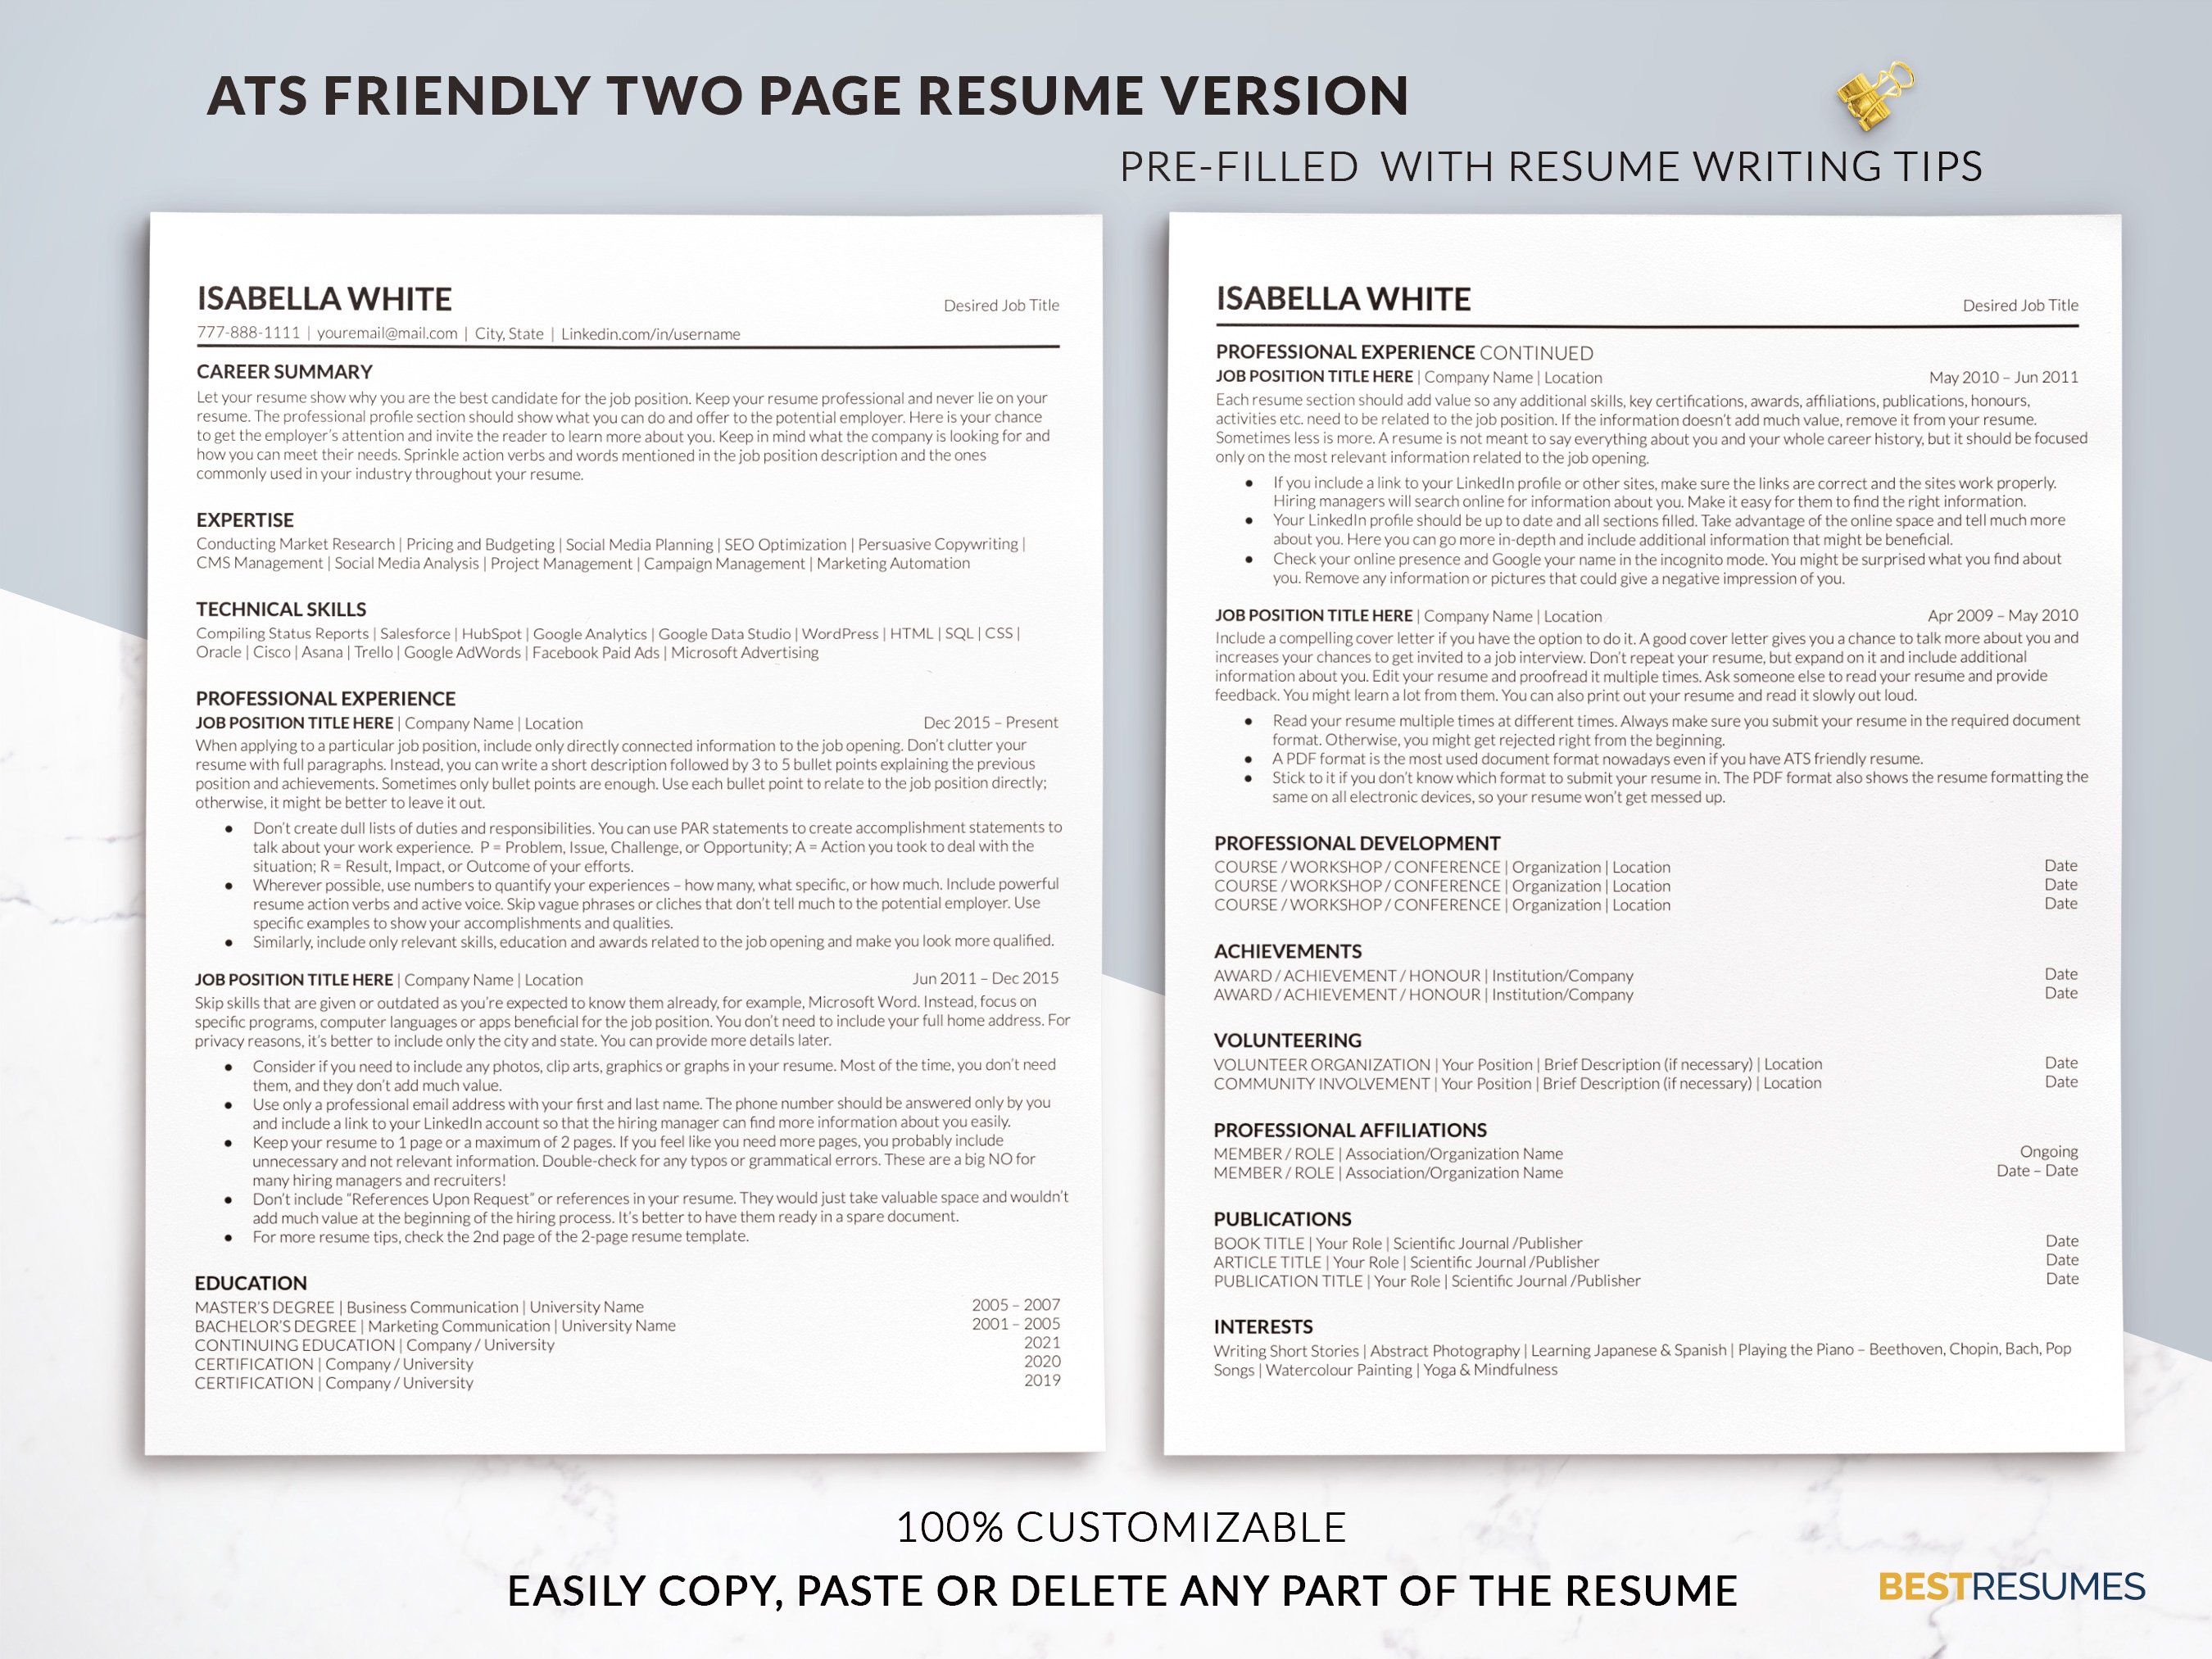 ats friendly resume template google docs resume two page isabella white 527